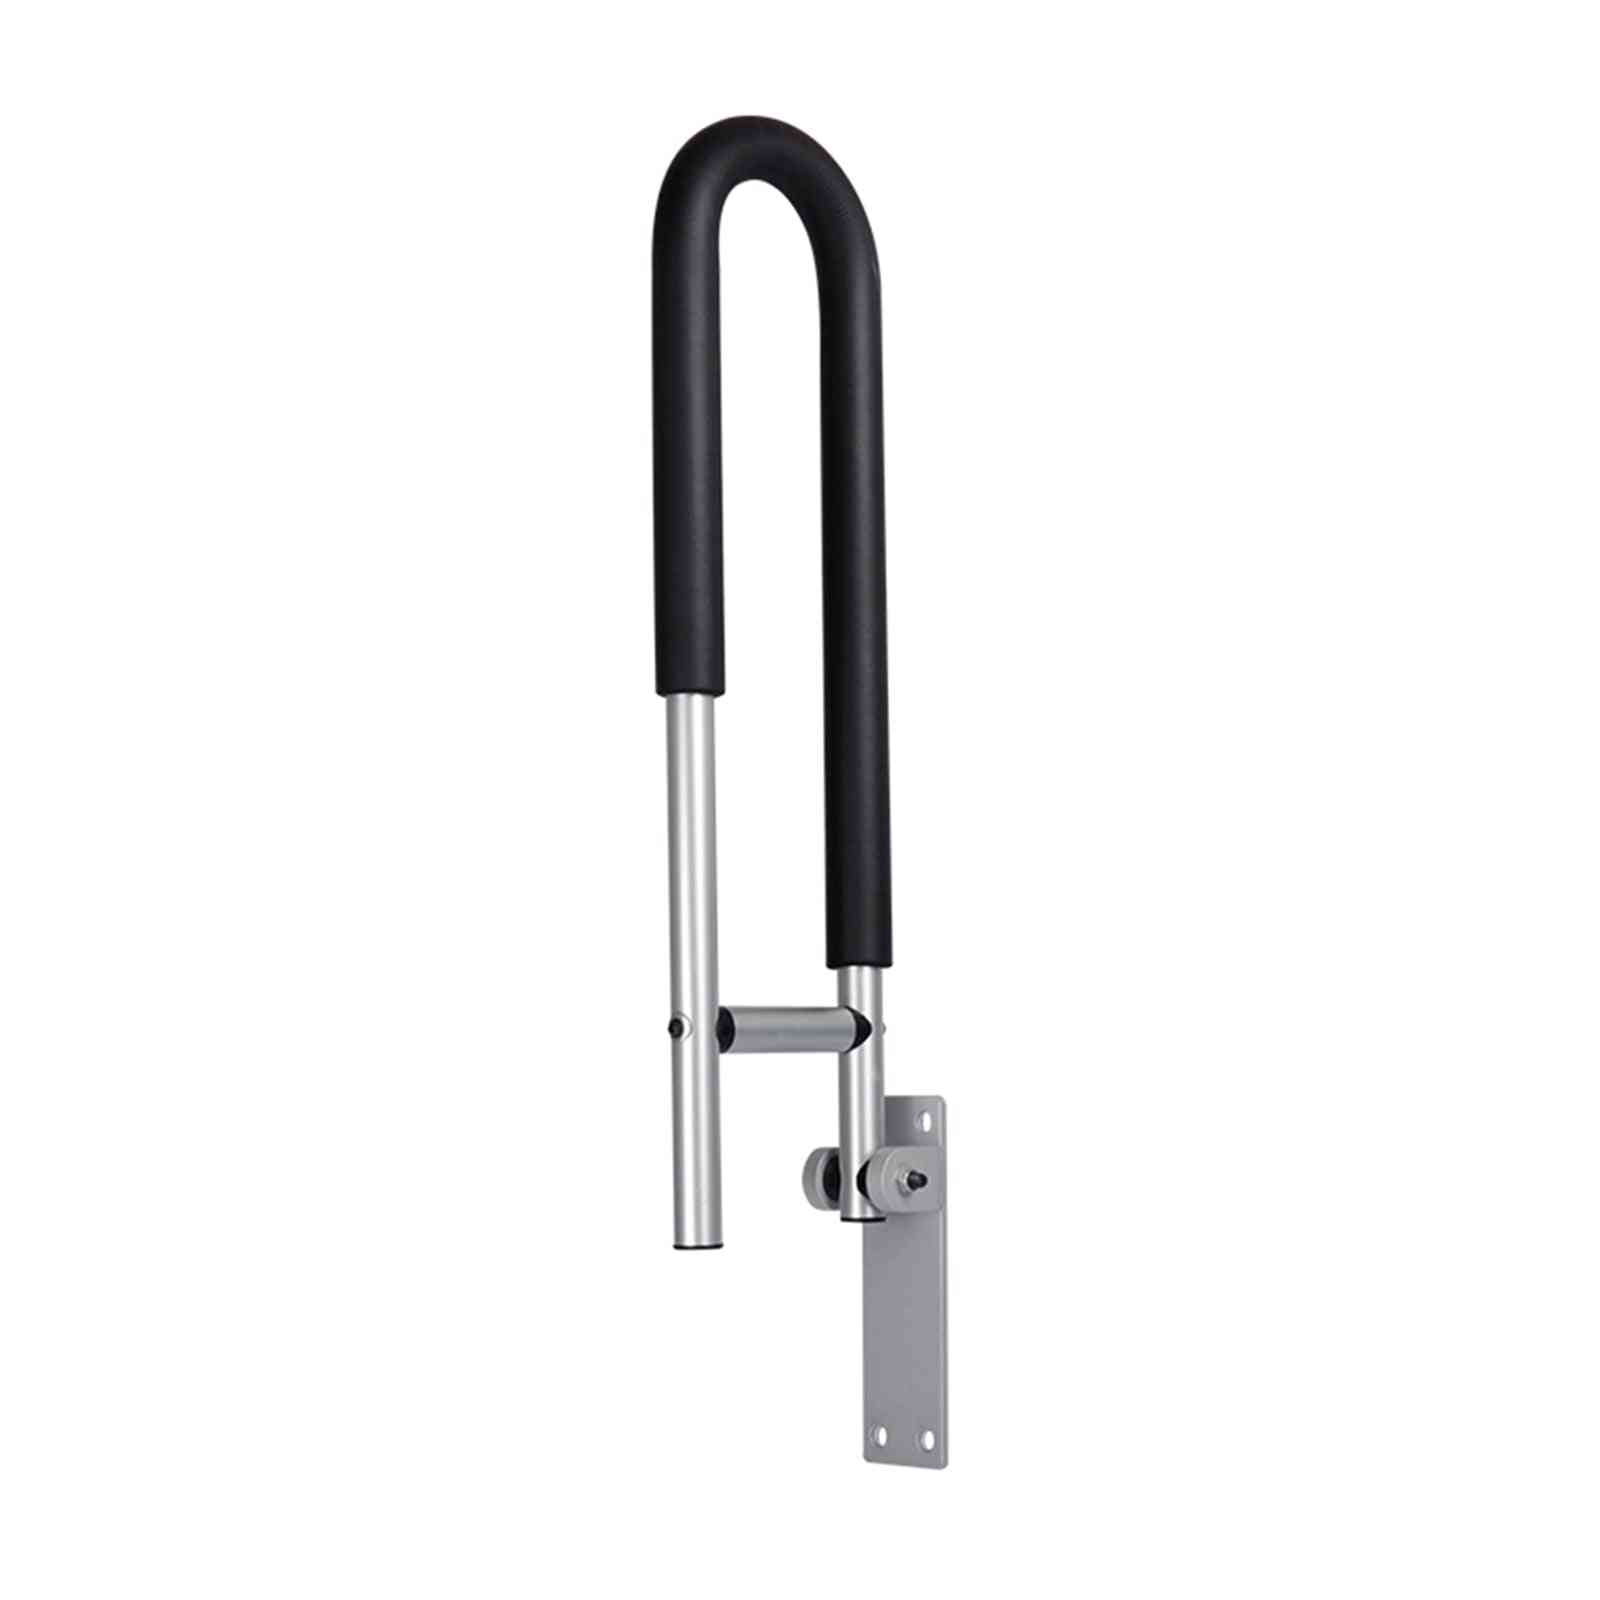 Bathroom Grab Bar Handle, Flip-up, Screw-in Toilet Safety Rail Hand Grip, Home Health Care Equipment For Elderly Disabled